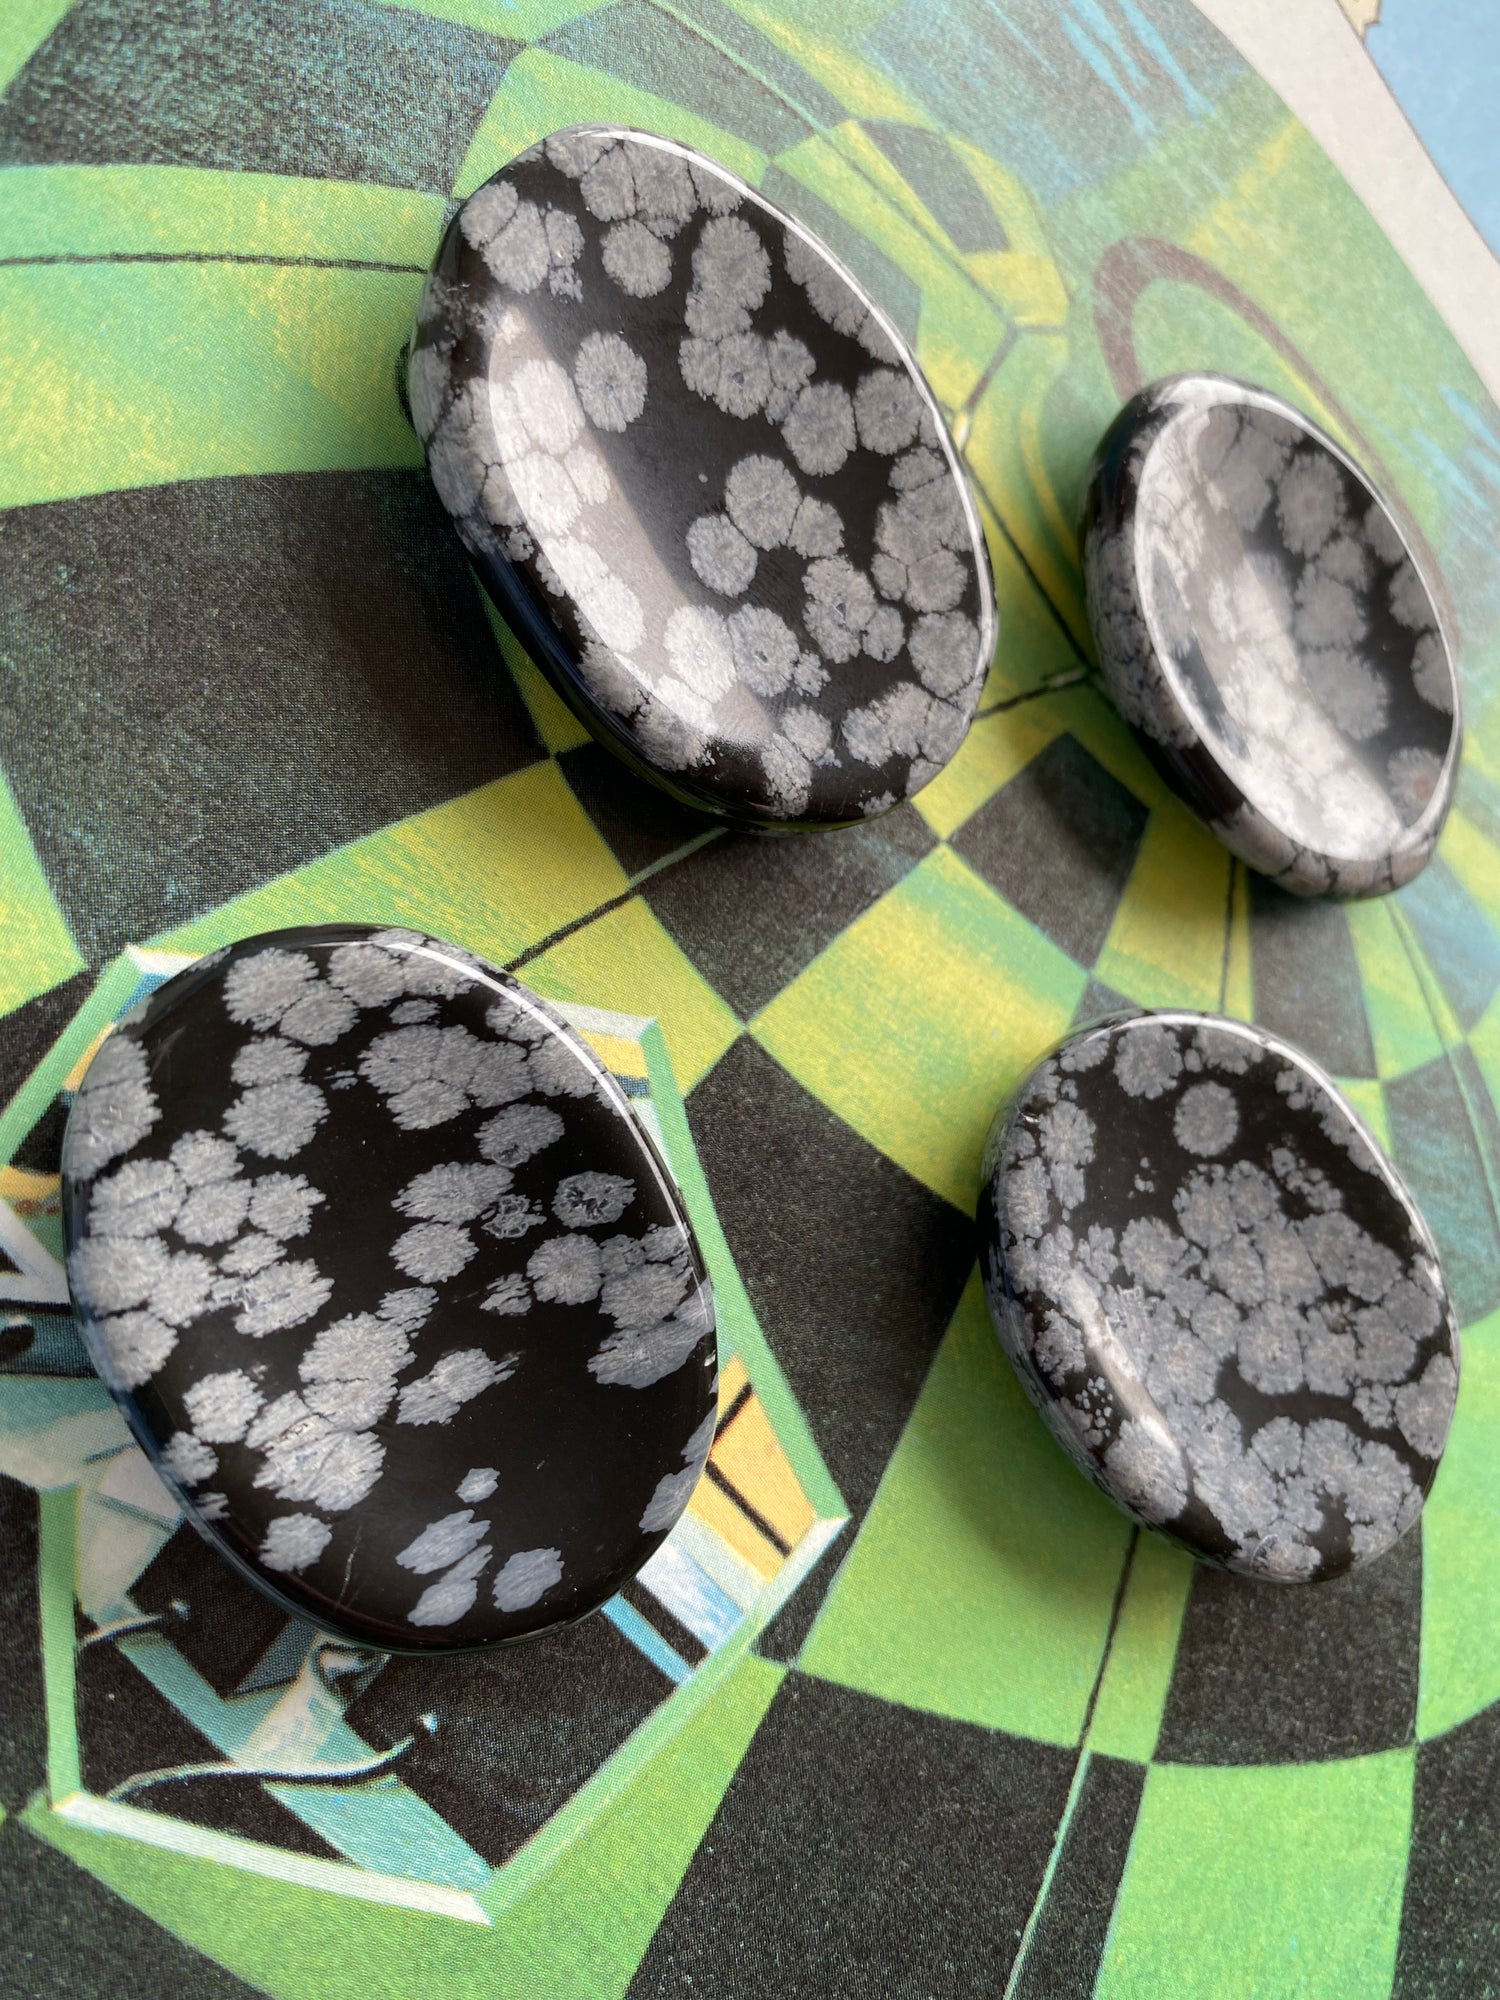 Snowflake Obsidian Worry Stone - Moon Room Shop and Wellness